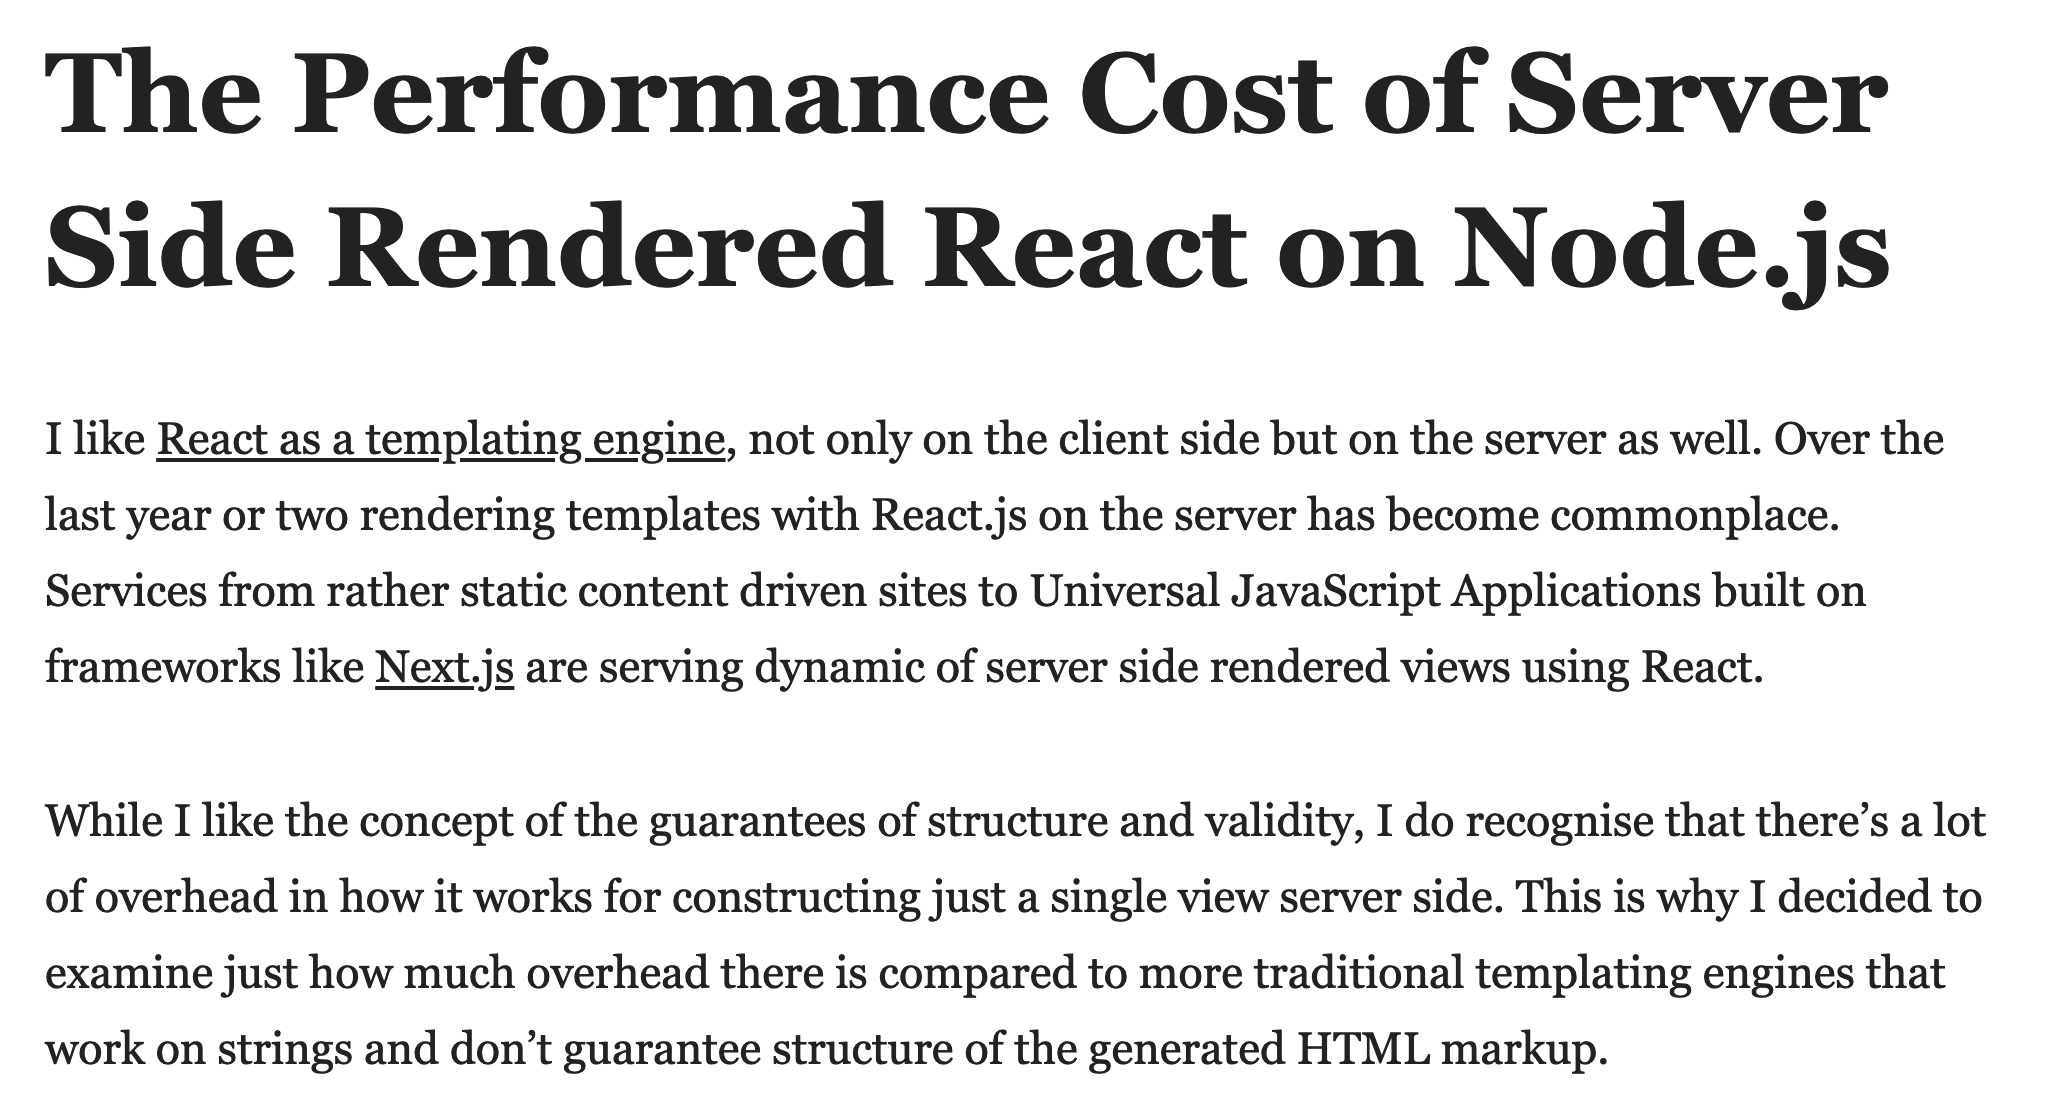 The Performance Cost of React